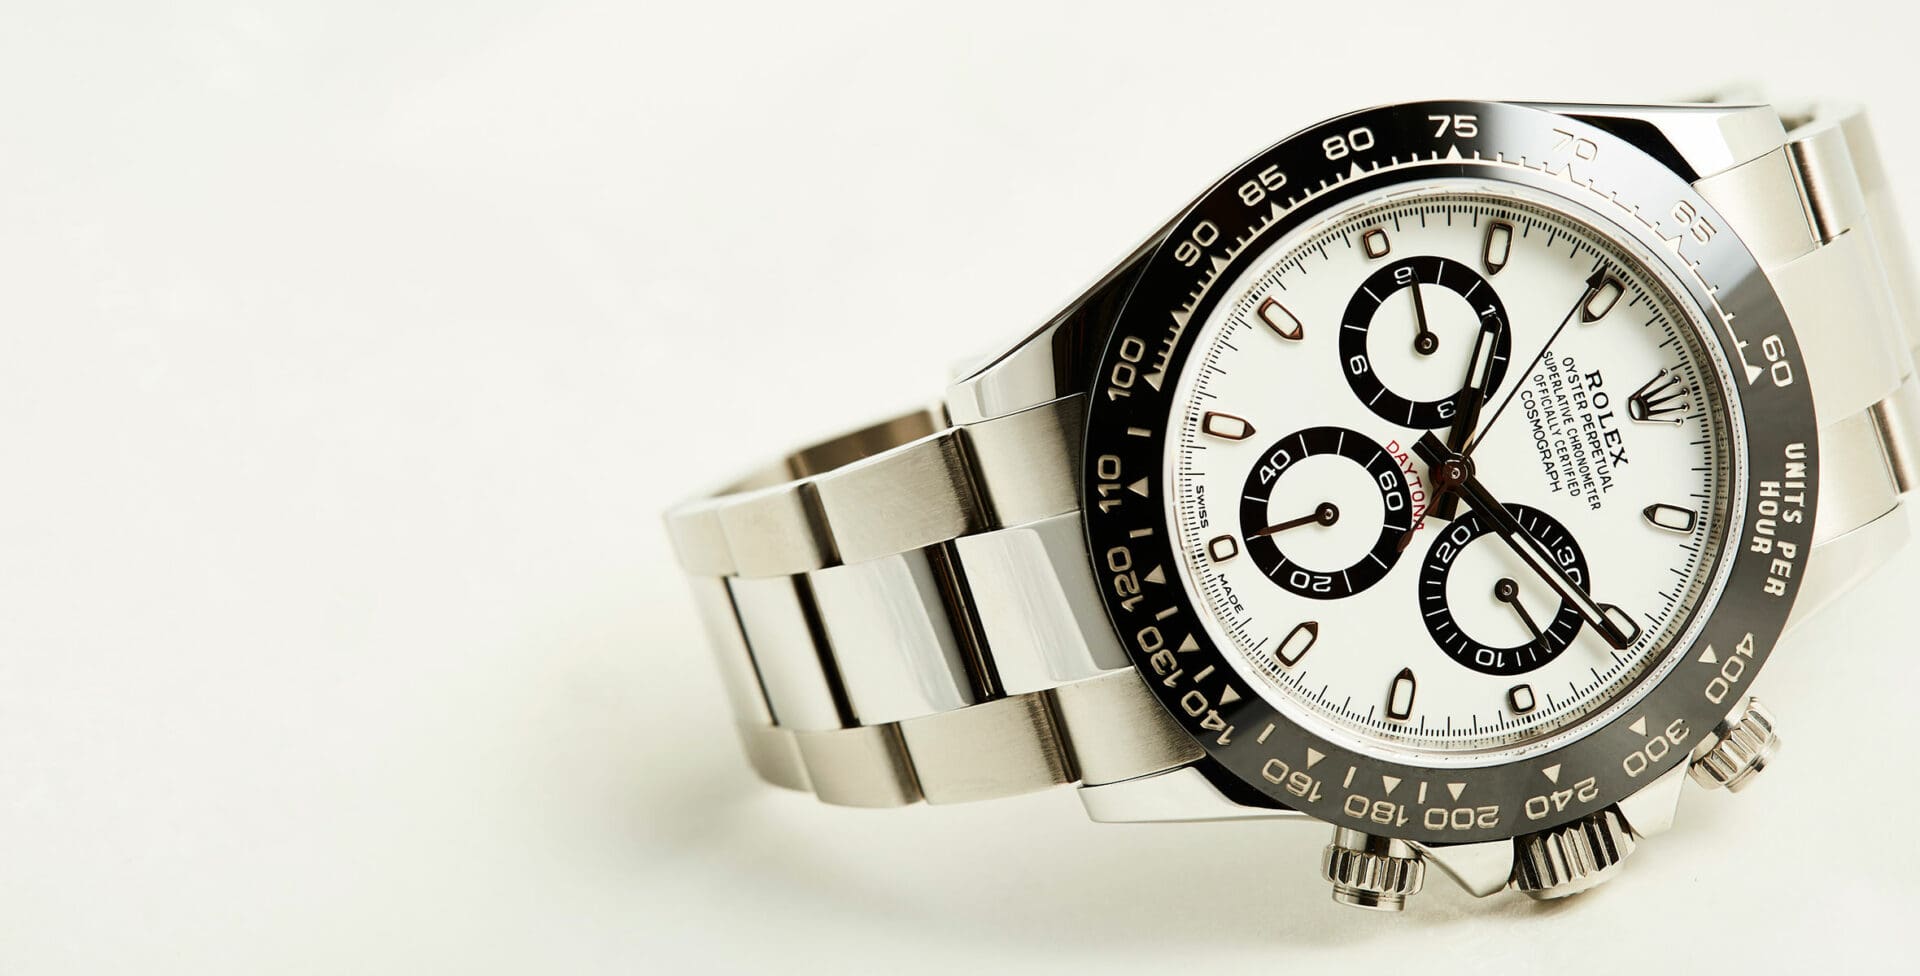 IN-DEPTH: The 2016 Rolex Cosmograph Daytona ref. 116500LN, and the one thing that’s wrong with it